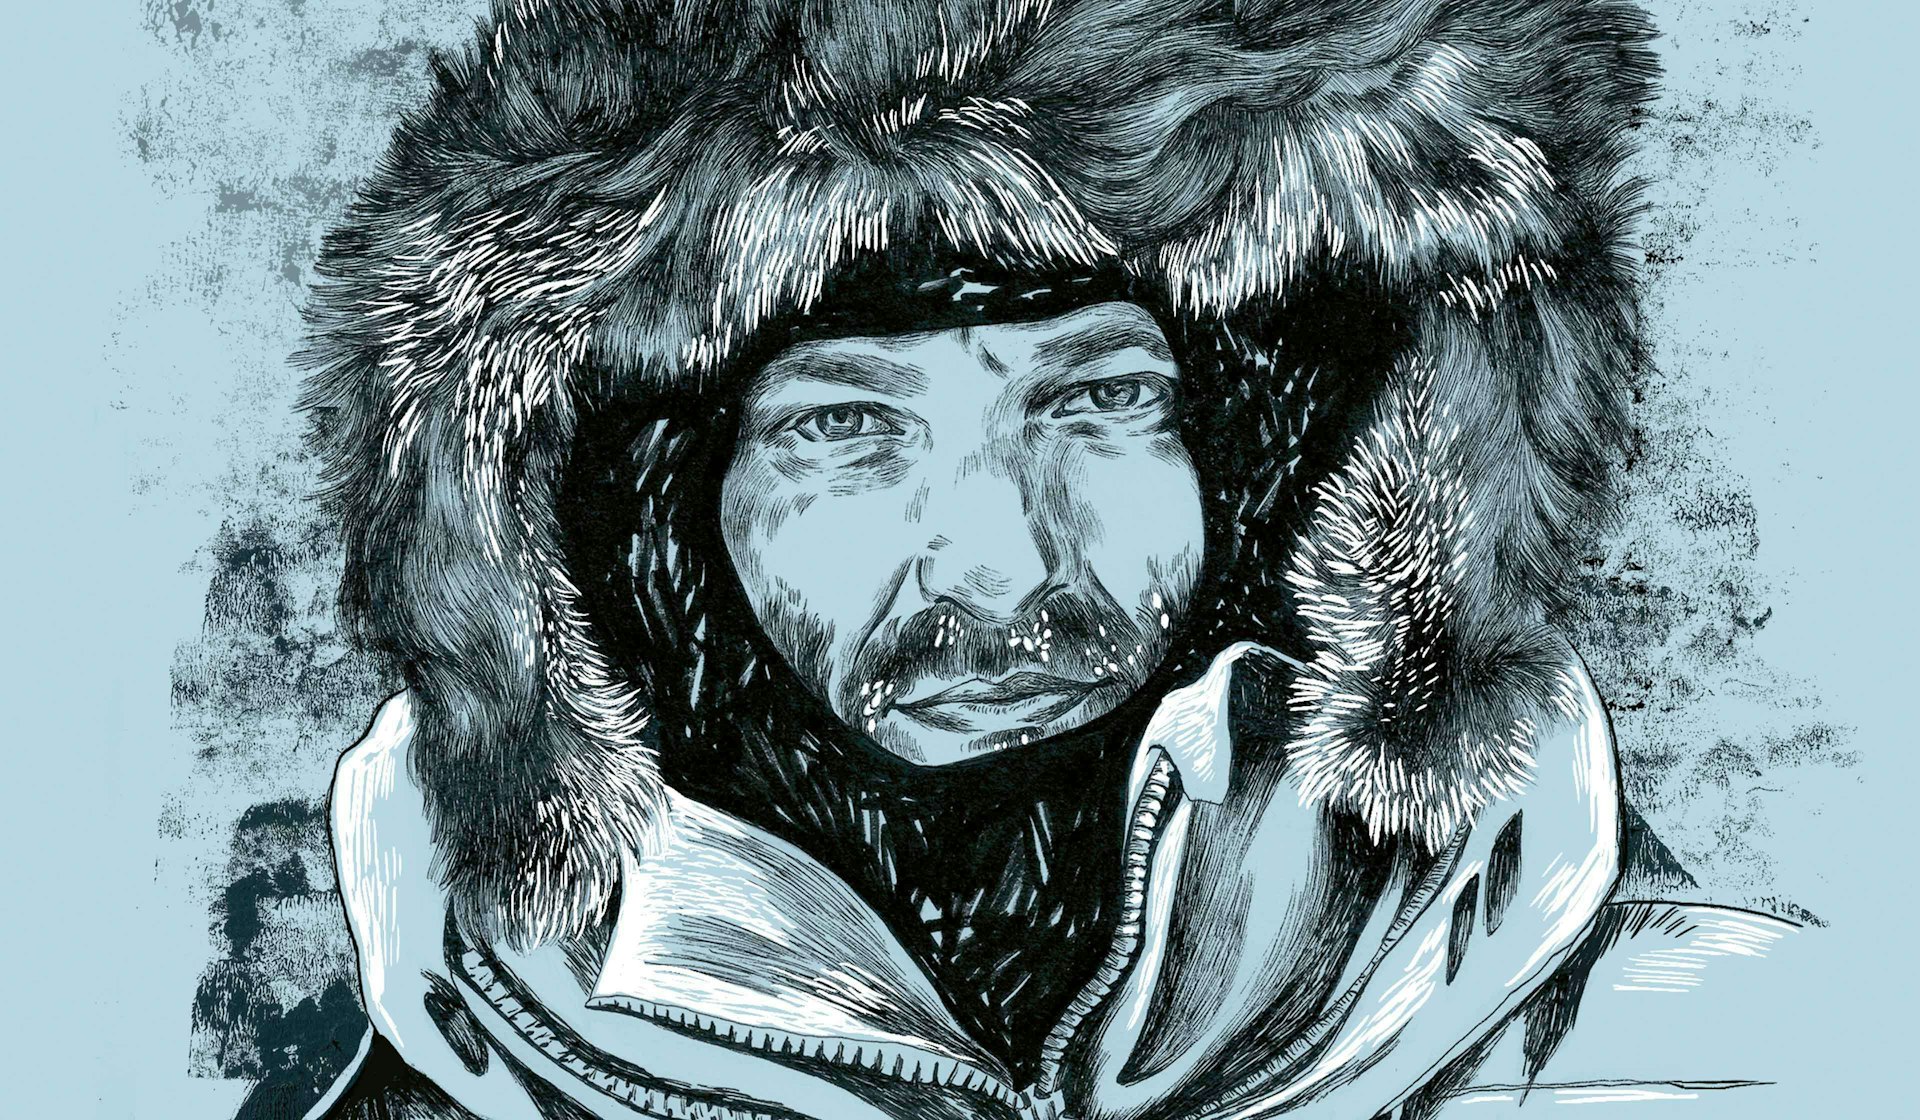 An antarctic explorer describes what it's like to walk to the edge of the earth and live to tell the tale